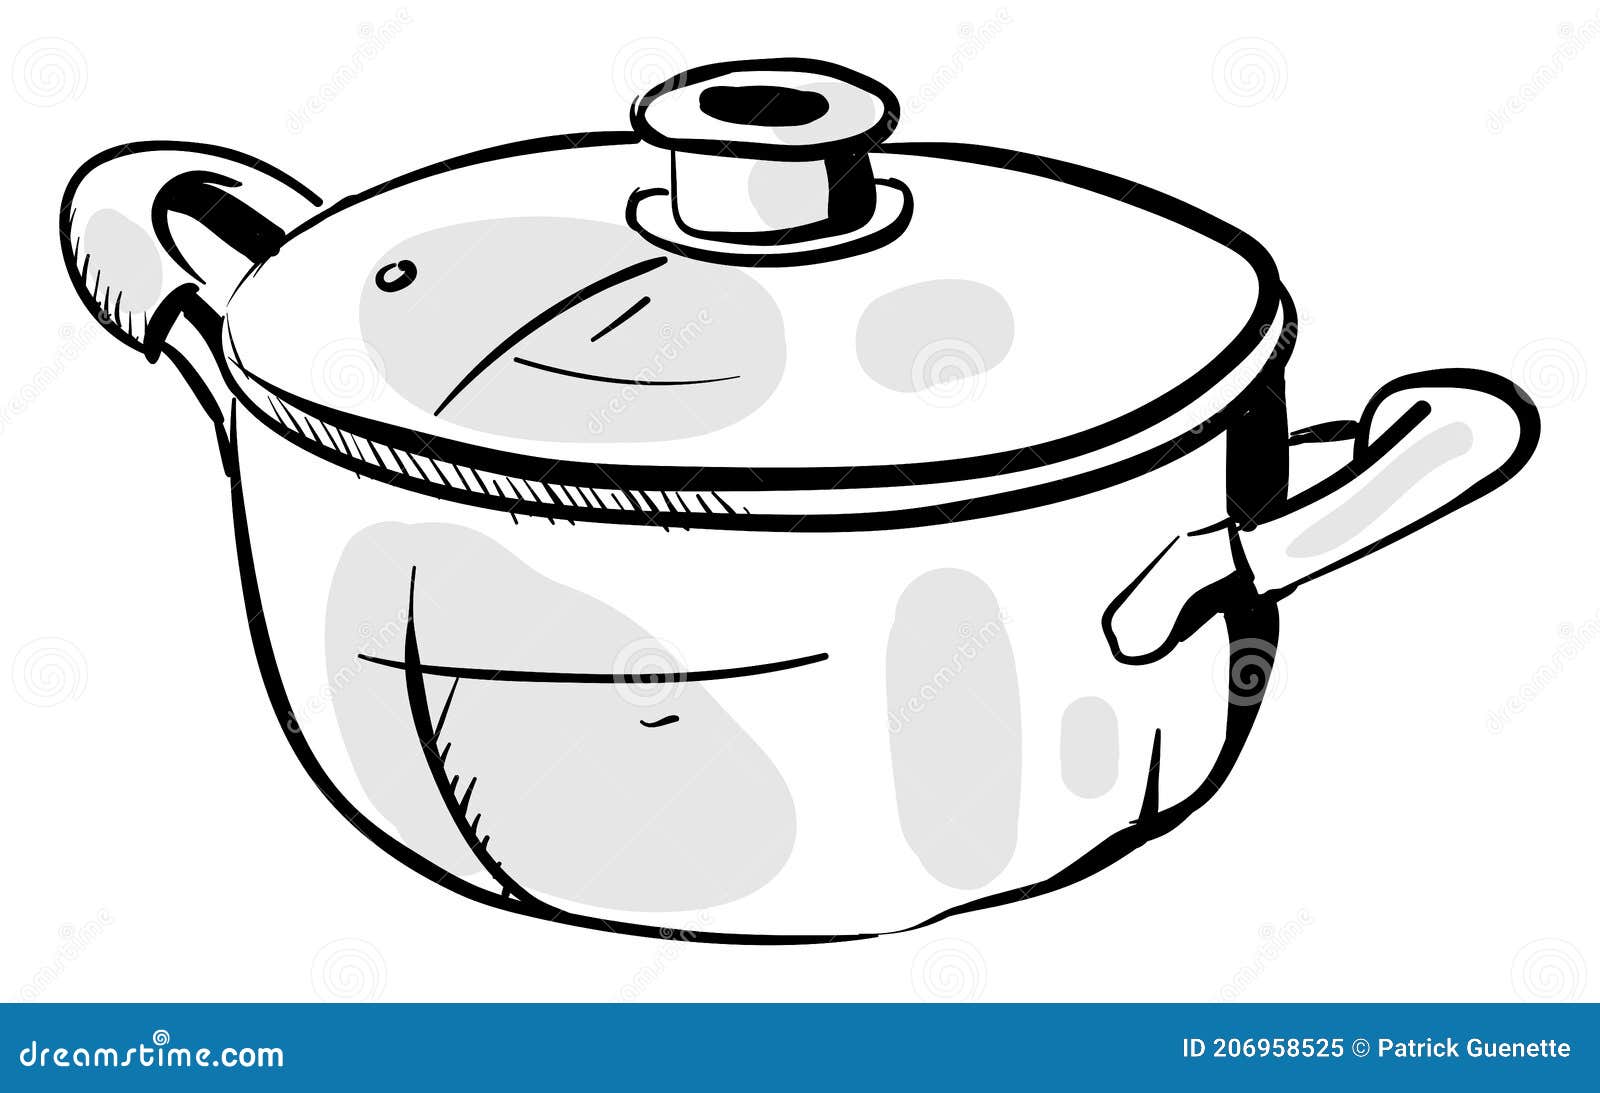 468 Empty Cooking Pot Drawing Stock Photos, High-Res Pictures, and Images -  Getty Images